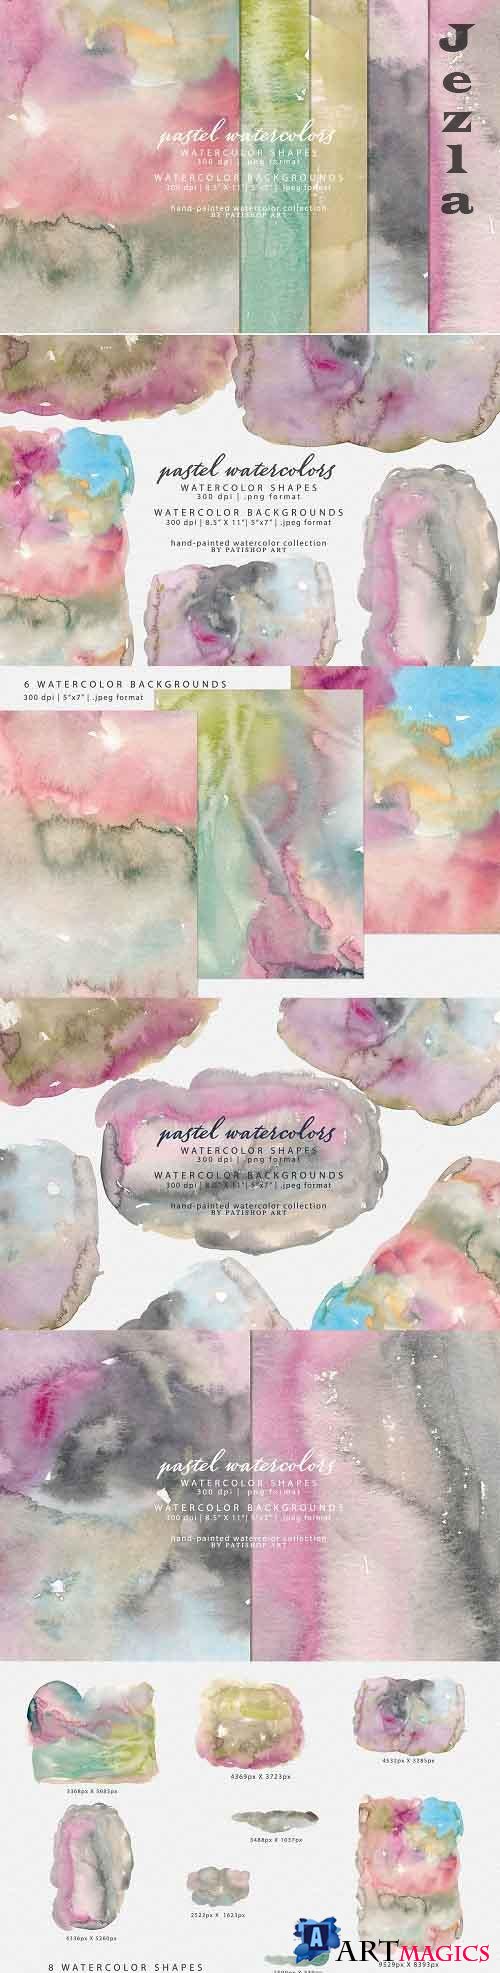 Watercolor Shapes & Backgrounds - 5323308